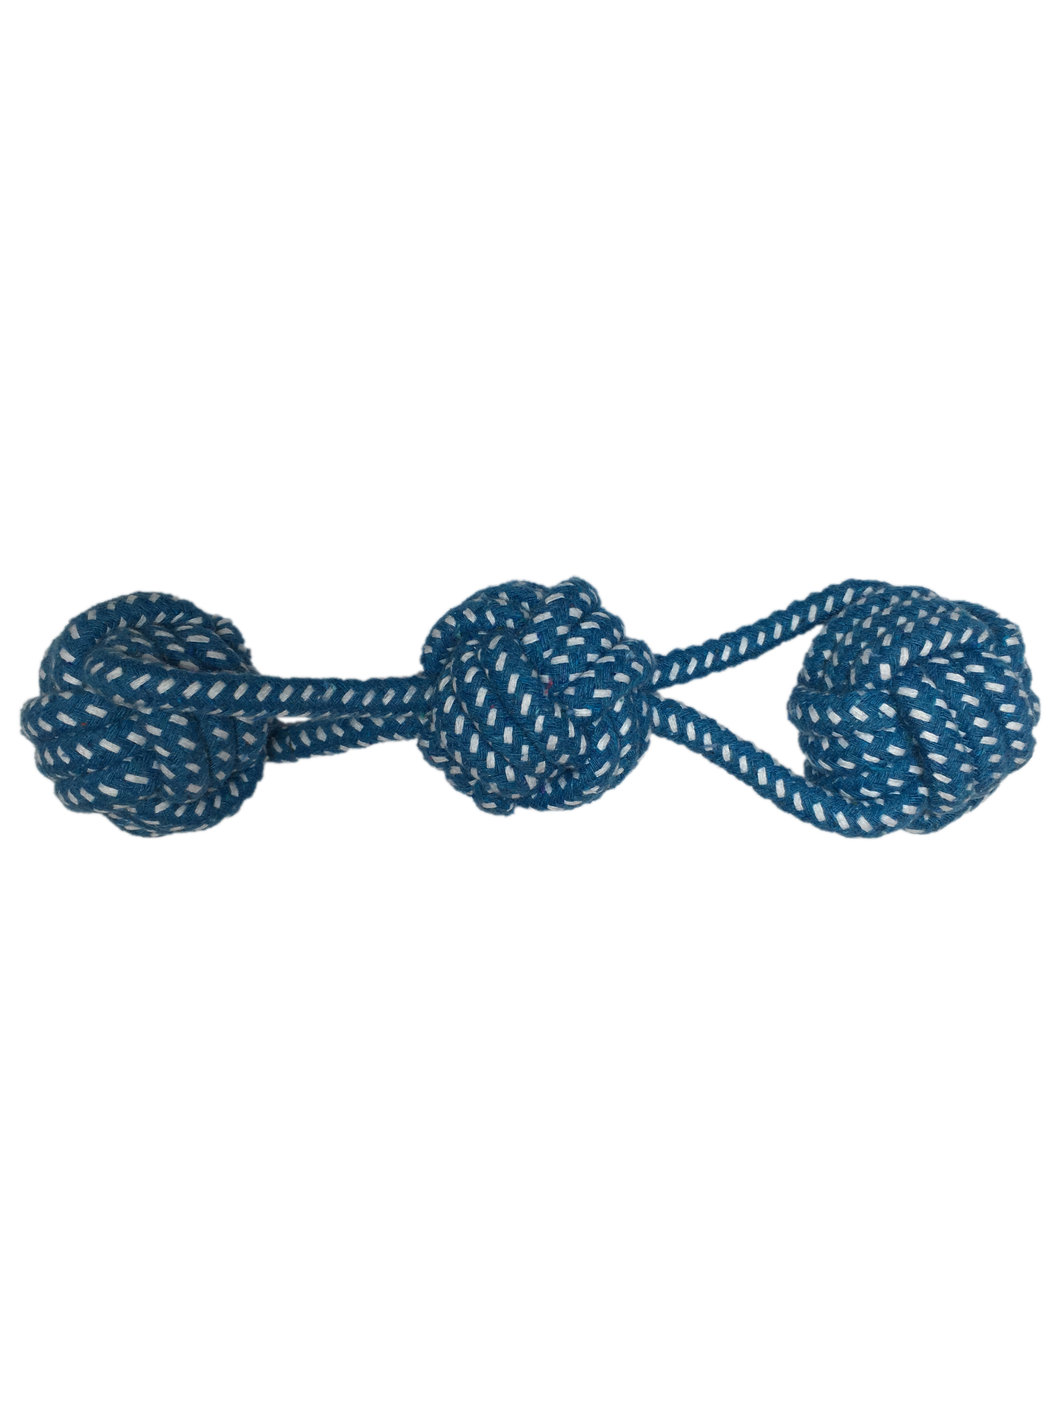 Rope Triple Ball M/L Dogs